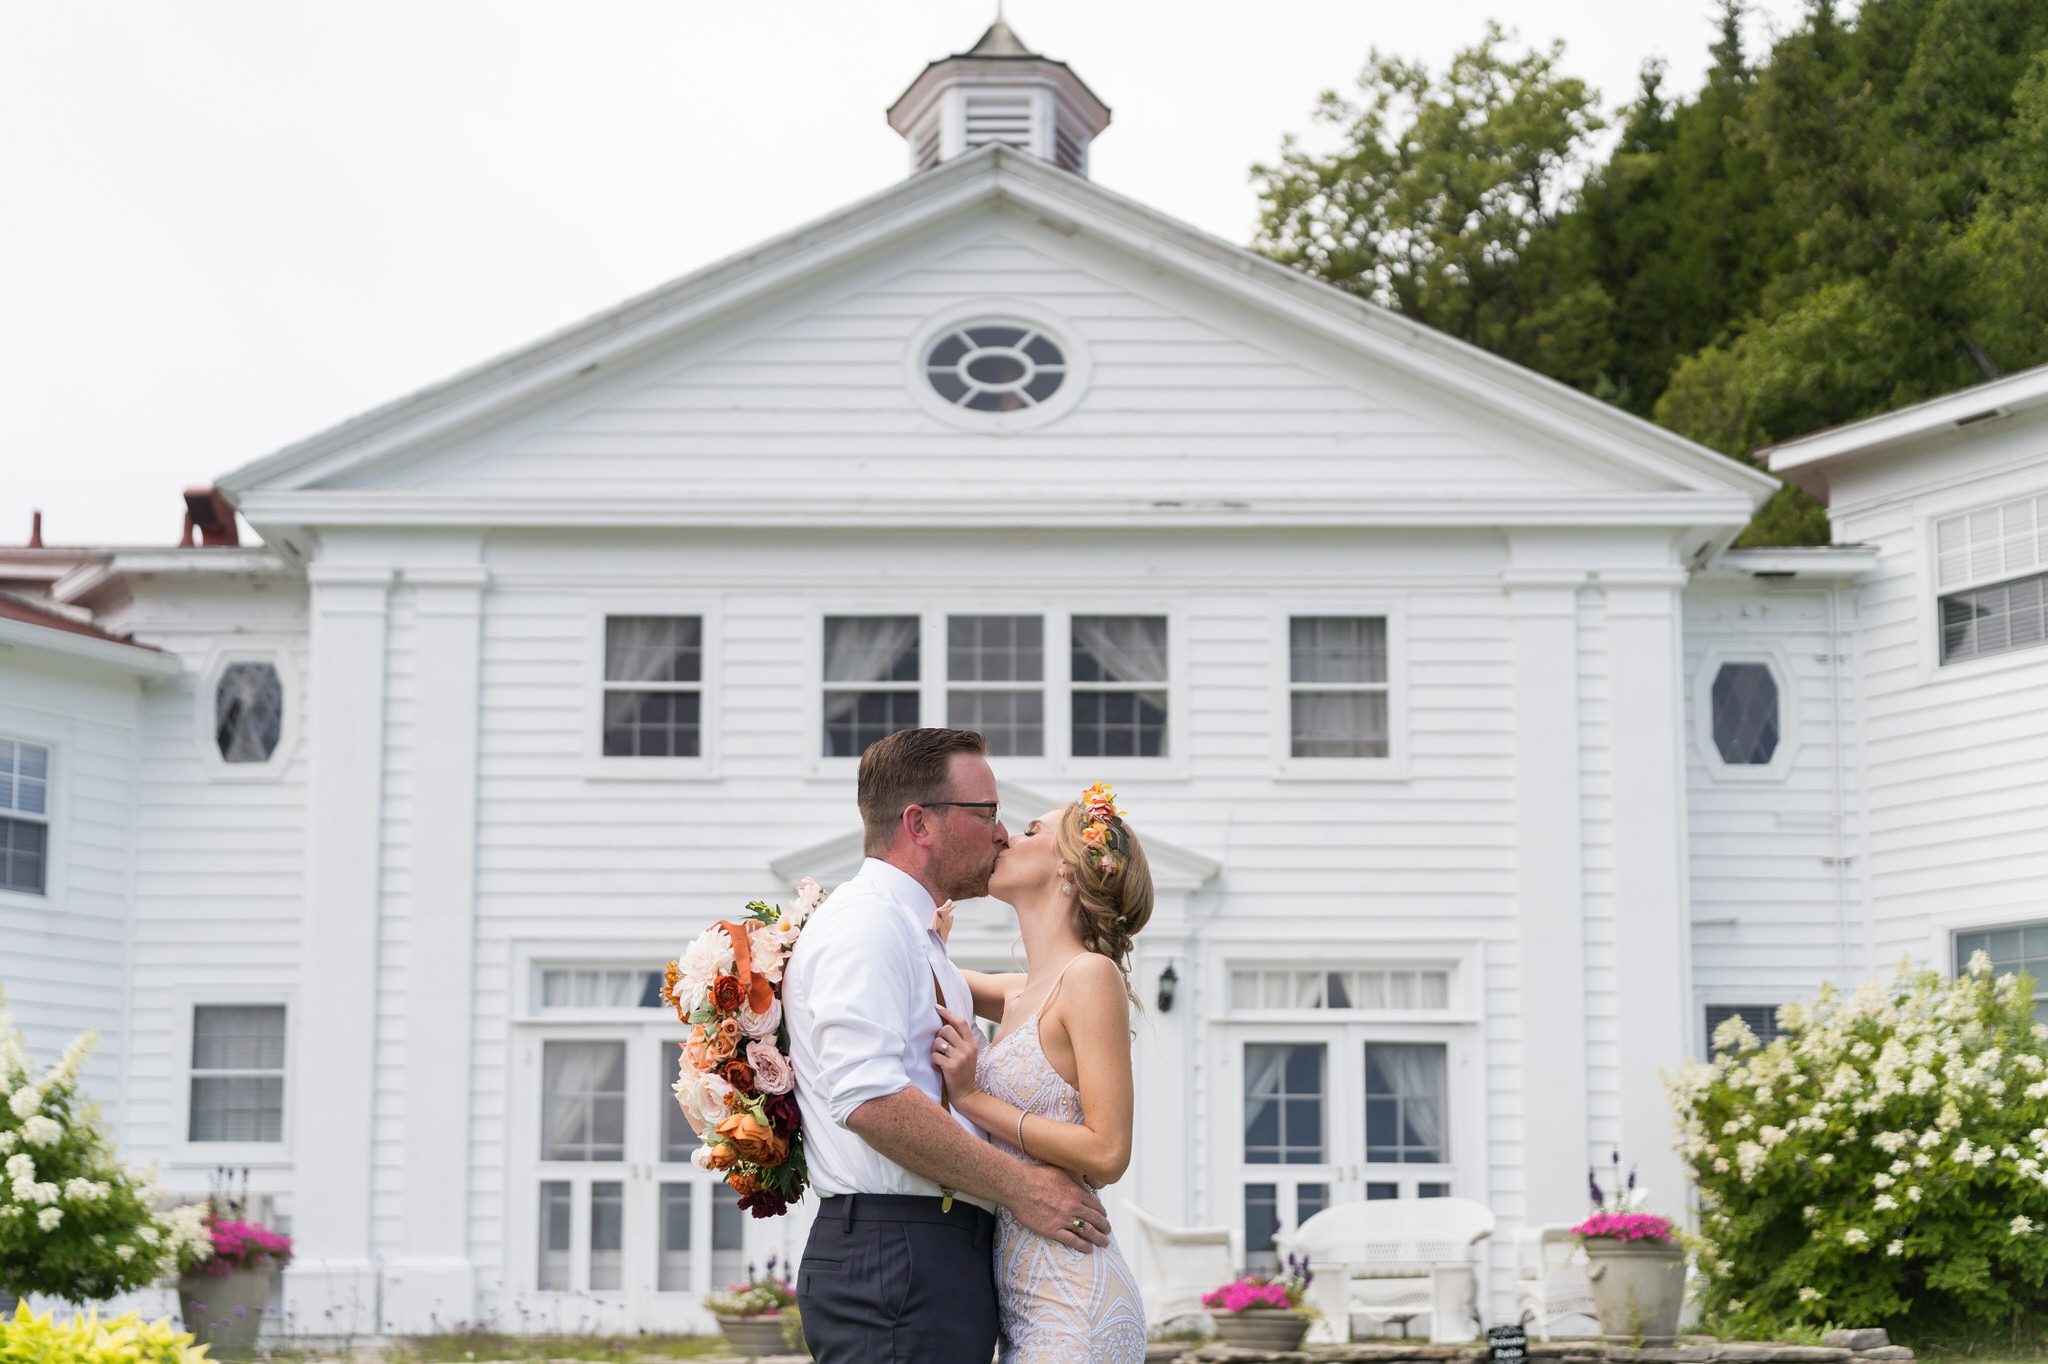 A bride and groom kiss in front of the Mission Pointe Resort on Mackinac Island.